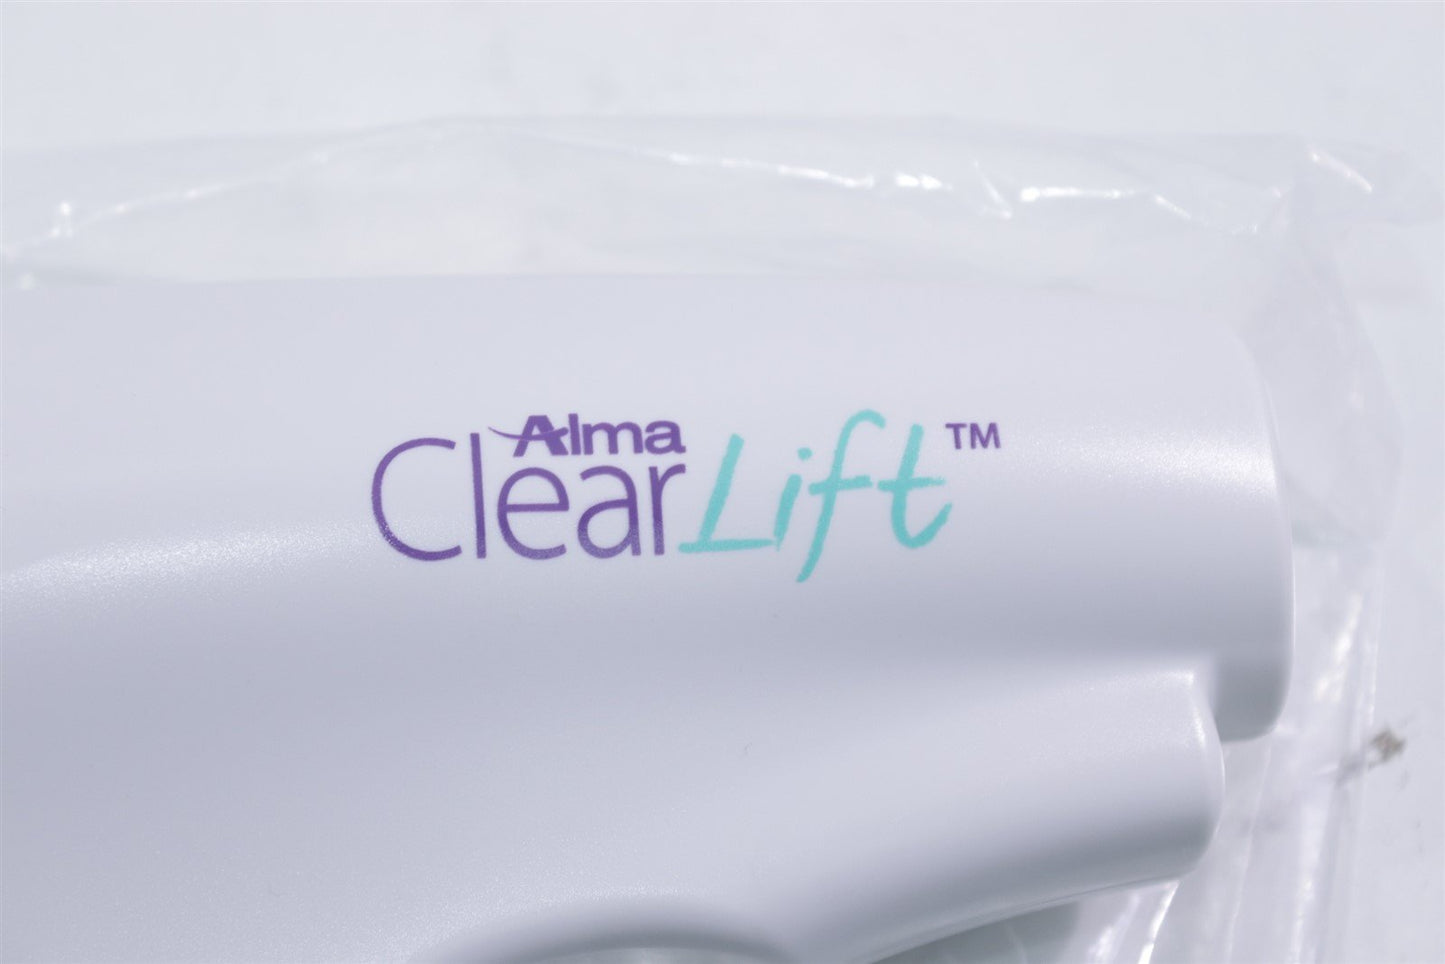 Alma Lasers ClearLift Plastic Handpiece Cover No Trigger NEW